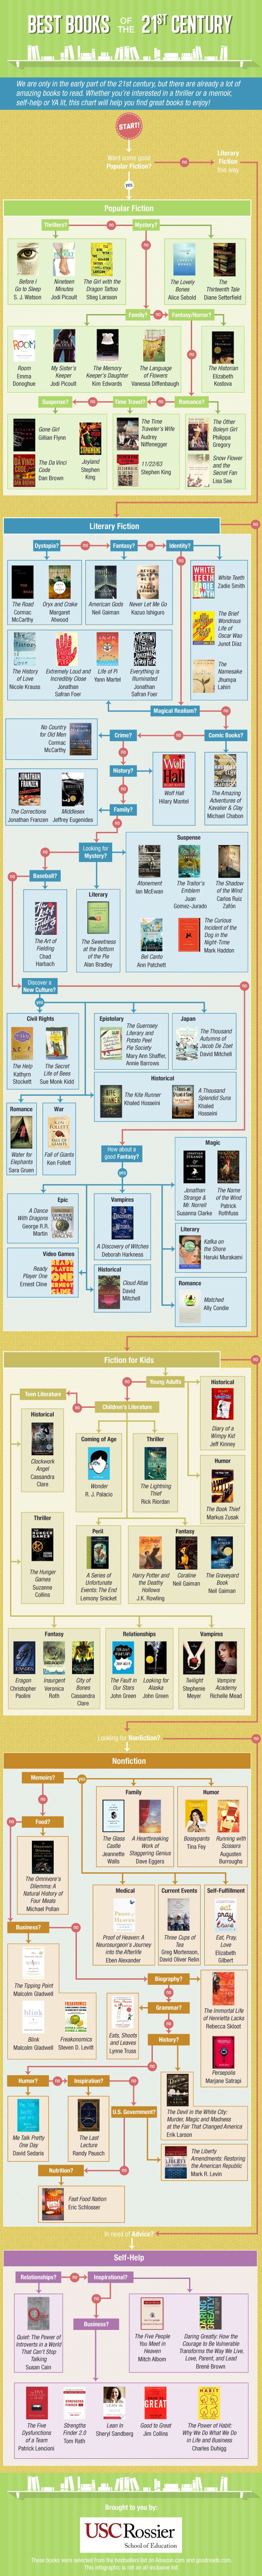 100 Best Books of the 21st Century Infographic